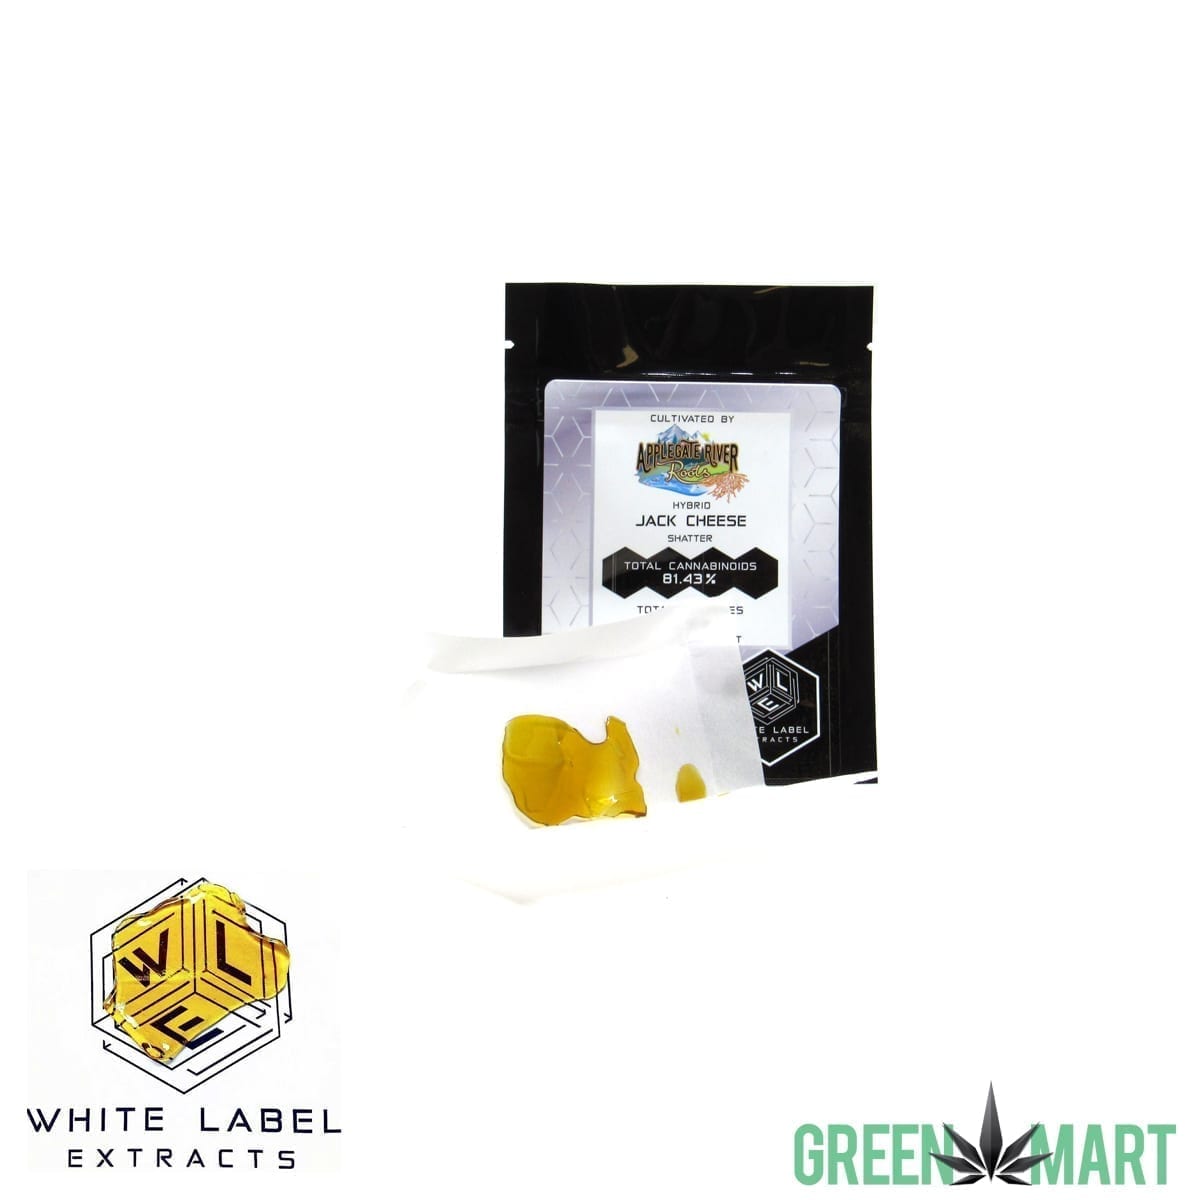 White Label Extracts - Jack Cheese